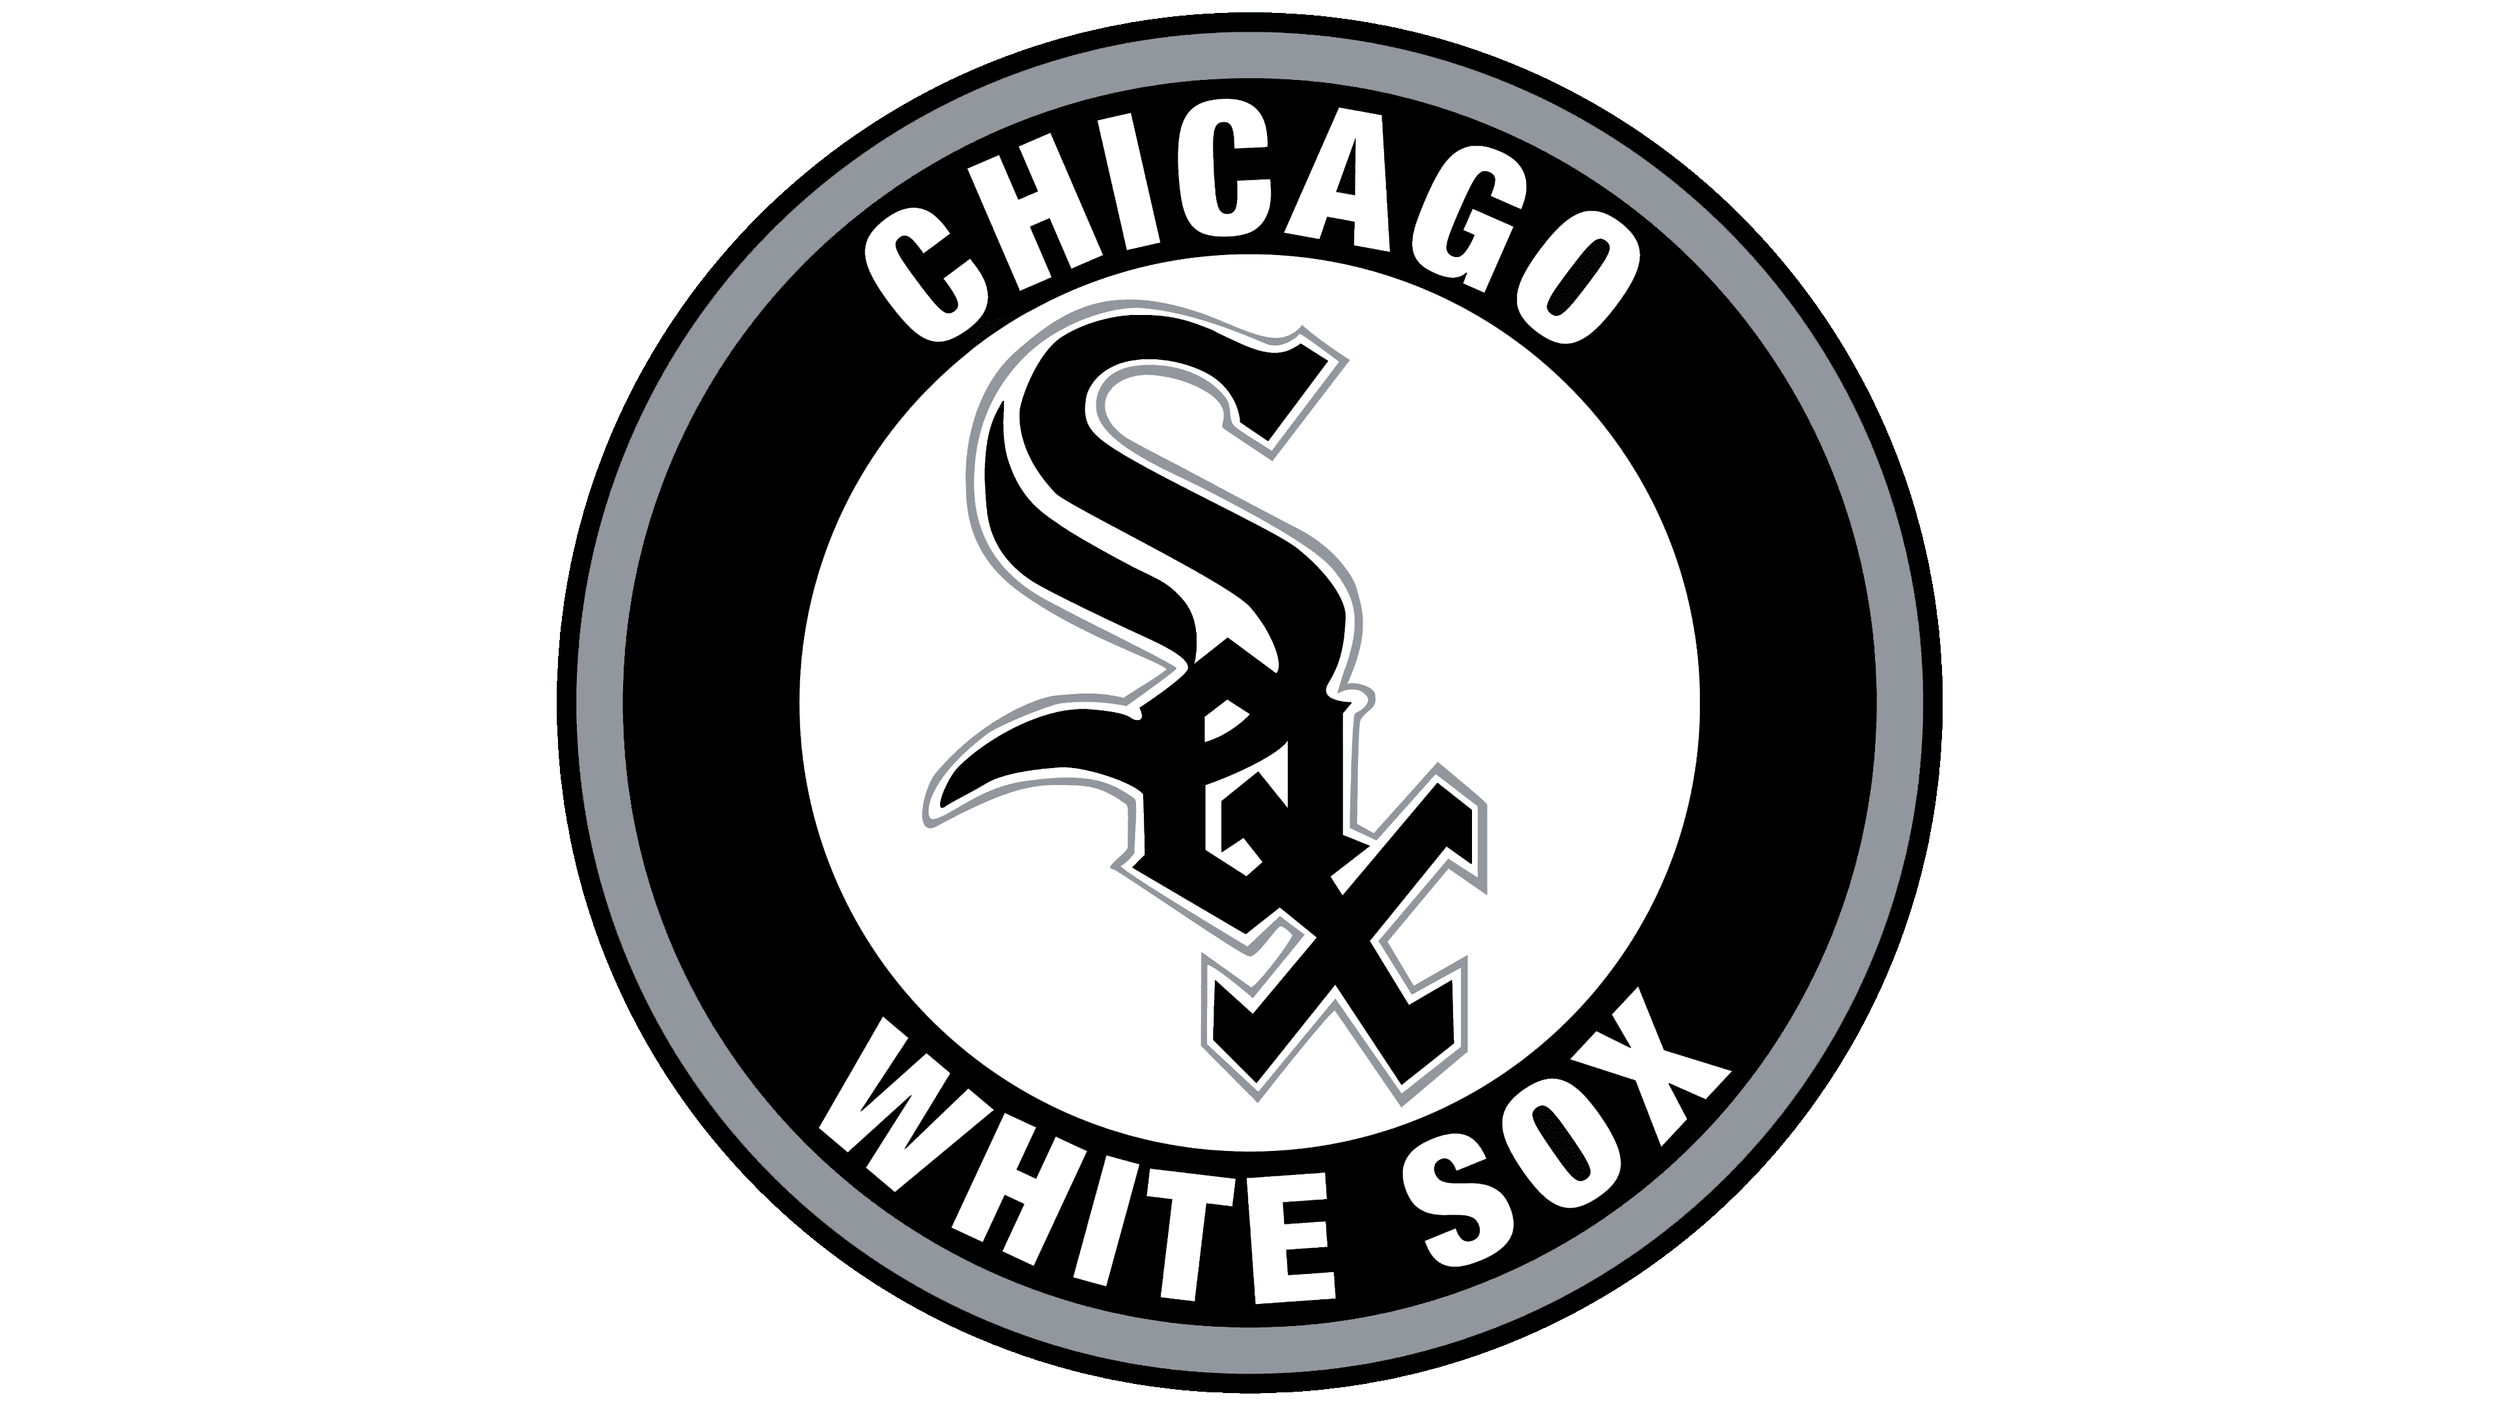 A Visit with White Sox Announcers Steve Stone and Jason Benetti and White Sox vs Guardians Game — The Harvard Club of Chicago